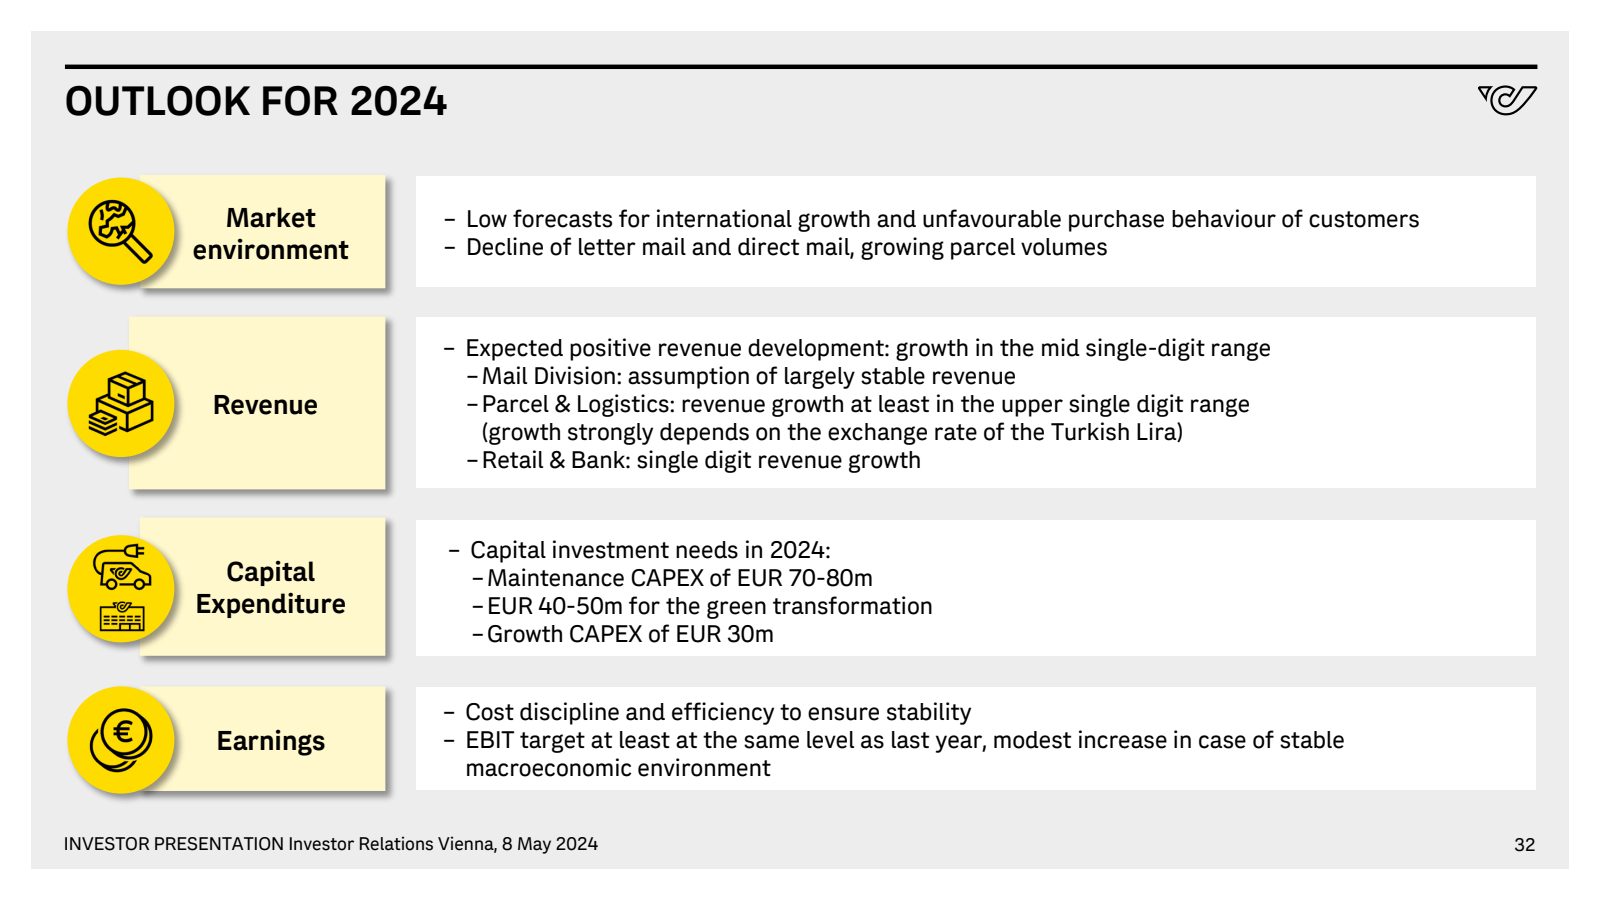 OUTLOOK FOR 2024 

M